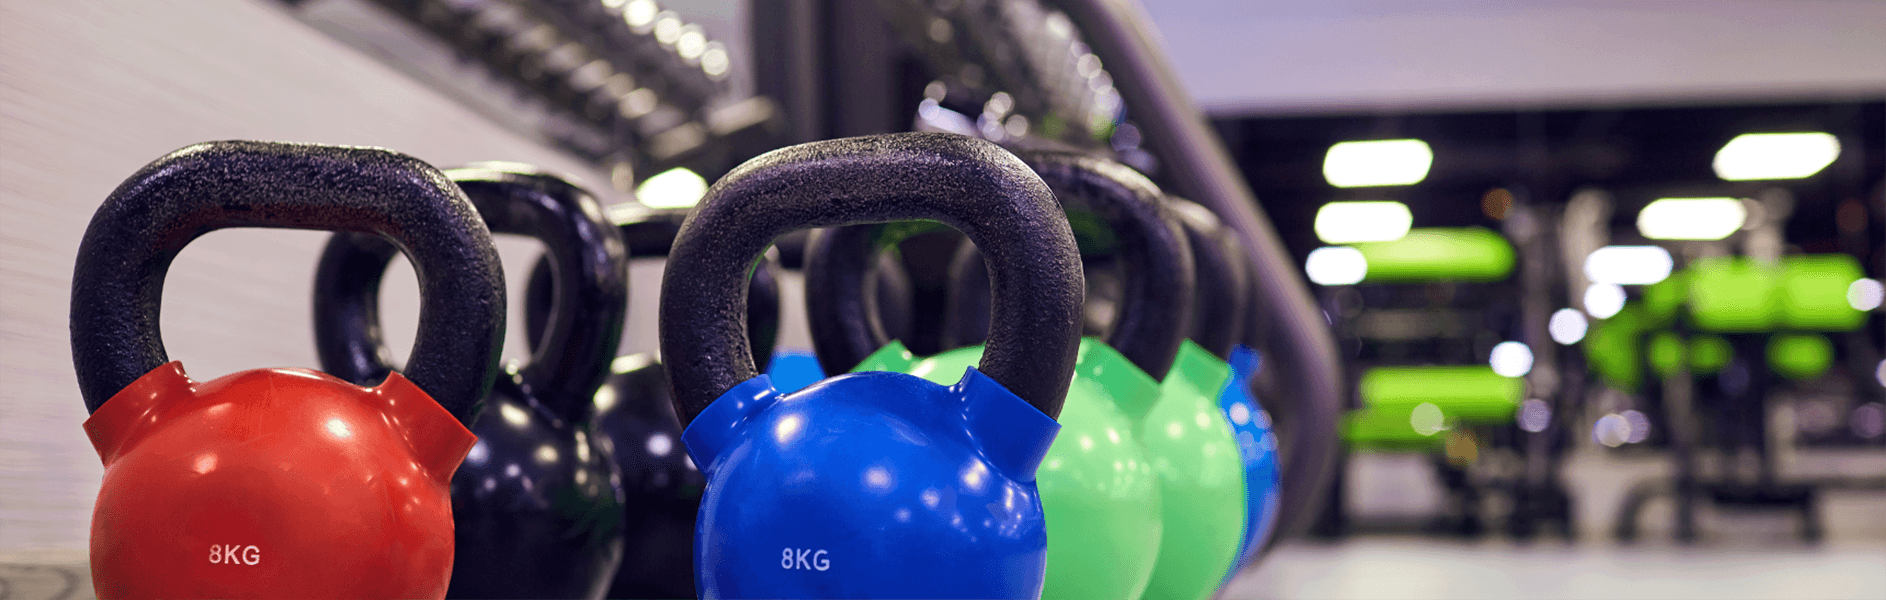 kettle bell weights & dumbells shown at a gym.